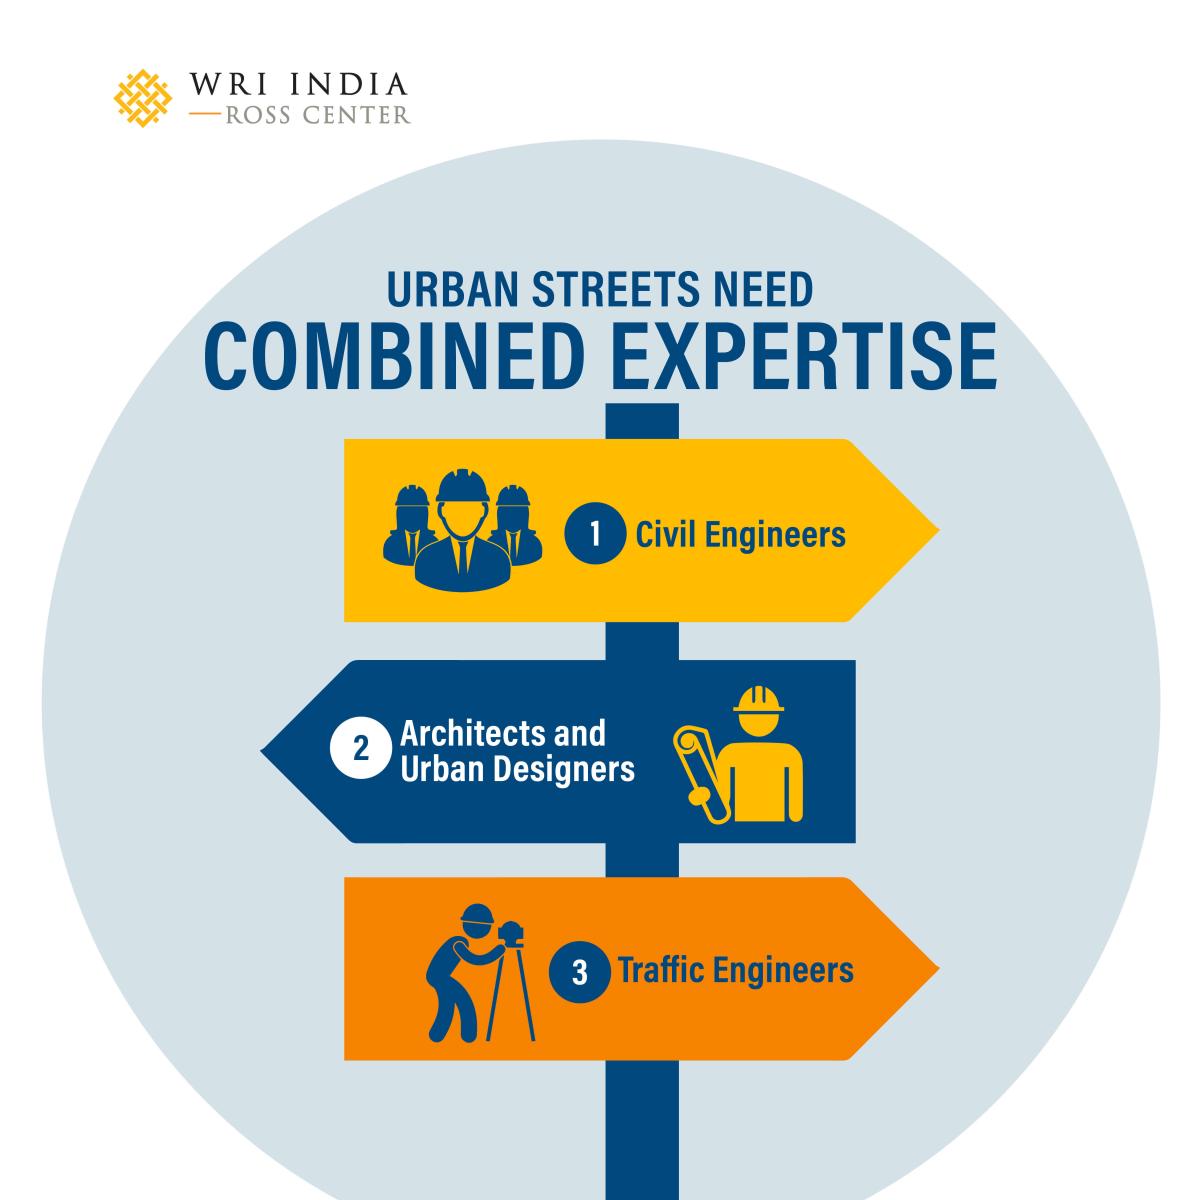 Urban Streets Need Combined Expertise to reduce crashes and make streets safer for all. Source: WRI India